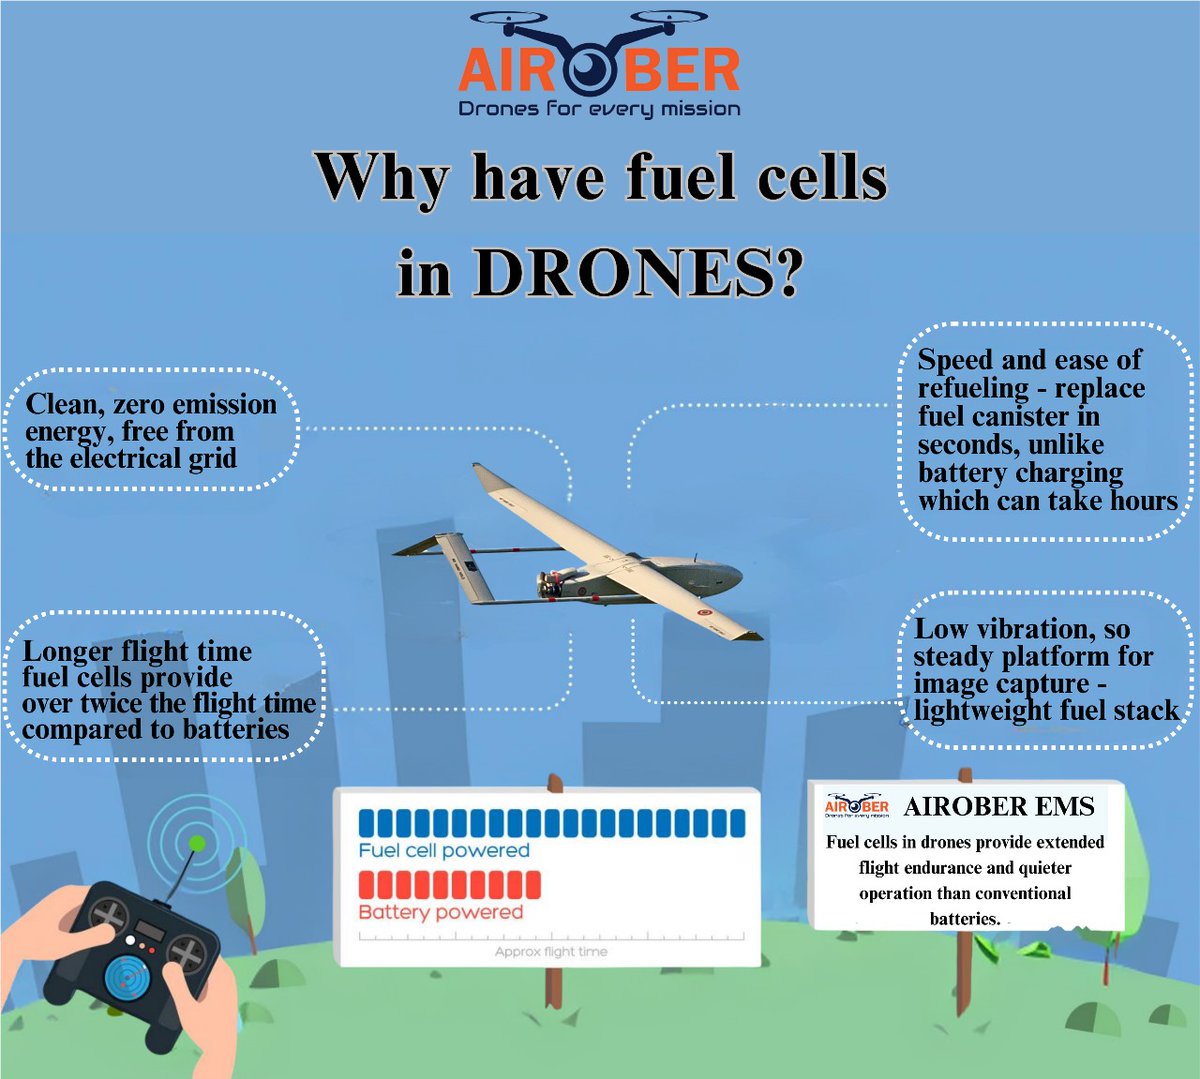 Ever wonder why drones need fuel? 🛢️ Let's explore the science behind it! From powering flight to extending endurance, fuel plays a crucial role in keeping drones soaring high. Discover more about the fascinating world of drone technology. 

#DroneFuel #Innovation #TechTalk